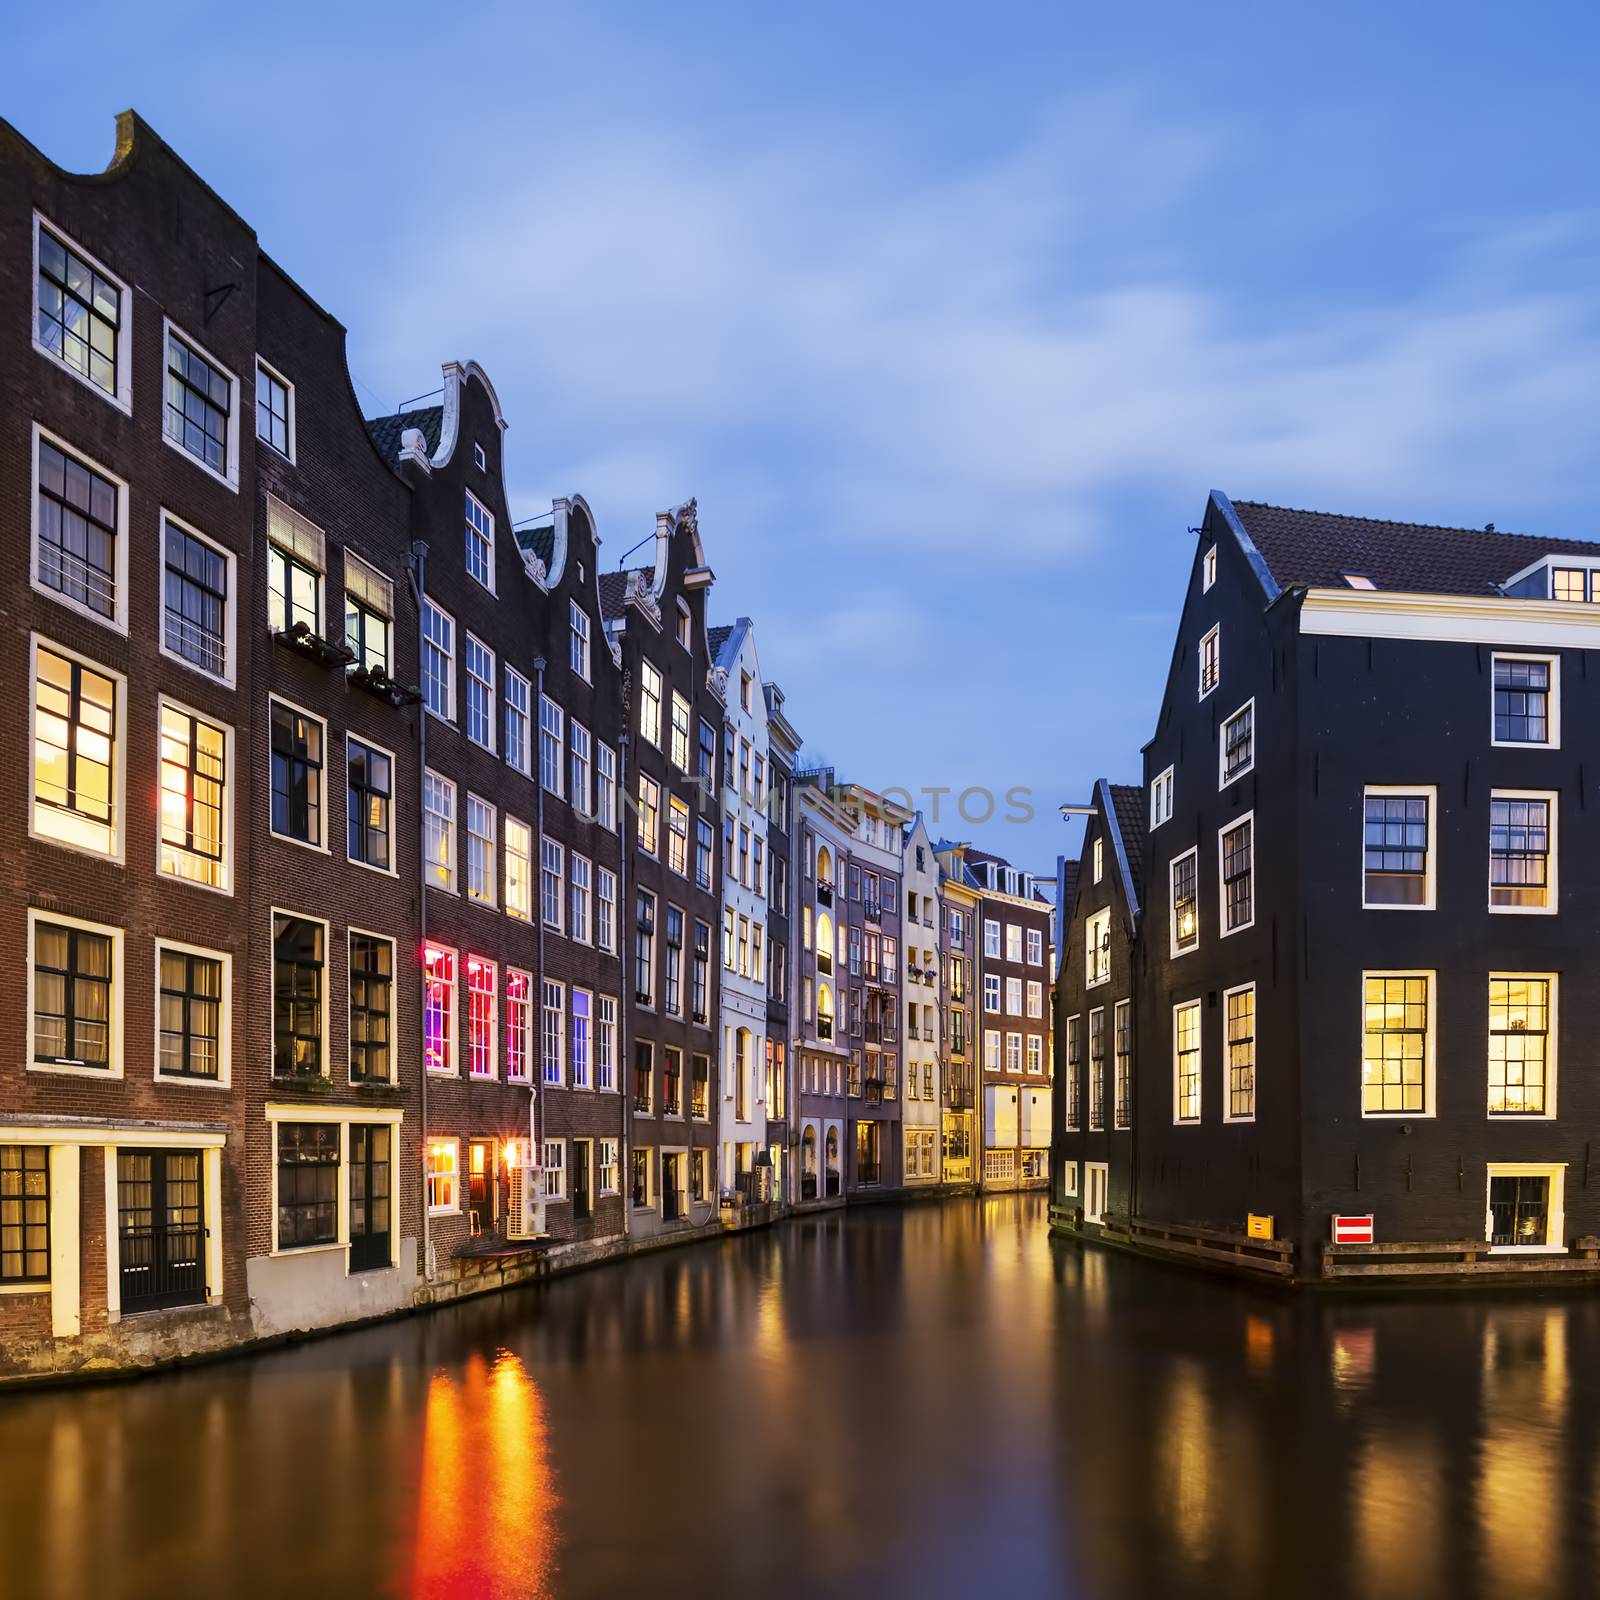 View of famous amsterdam canal by night by vwalakte